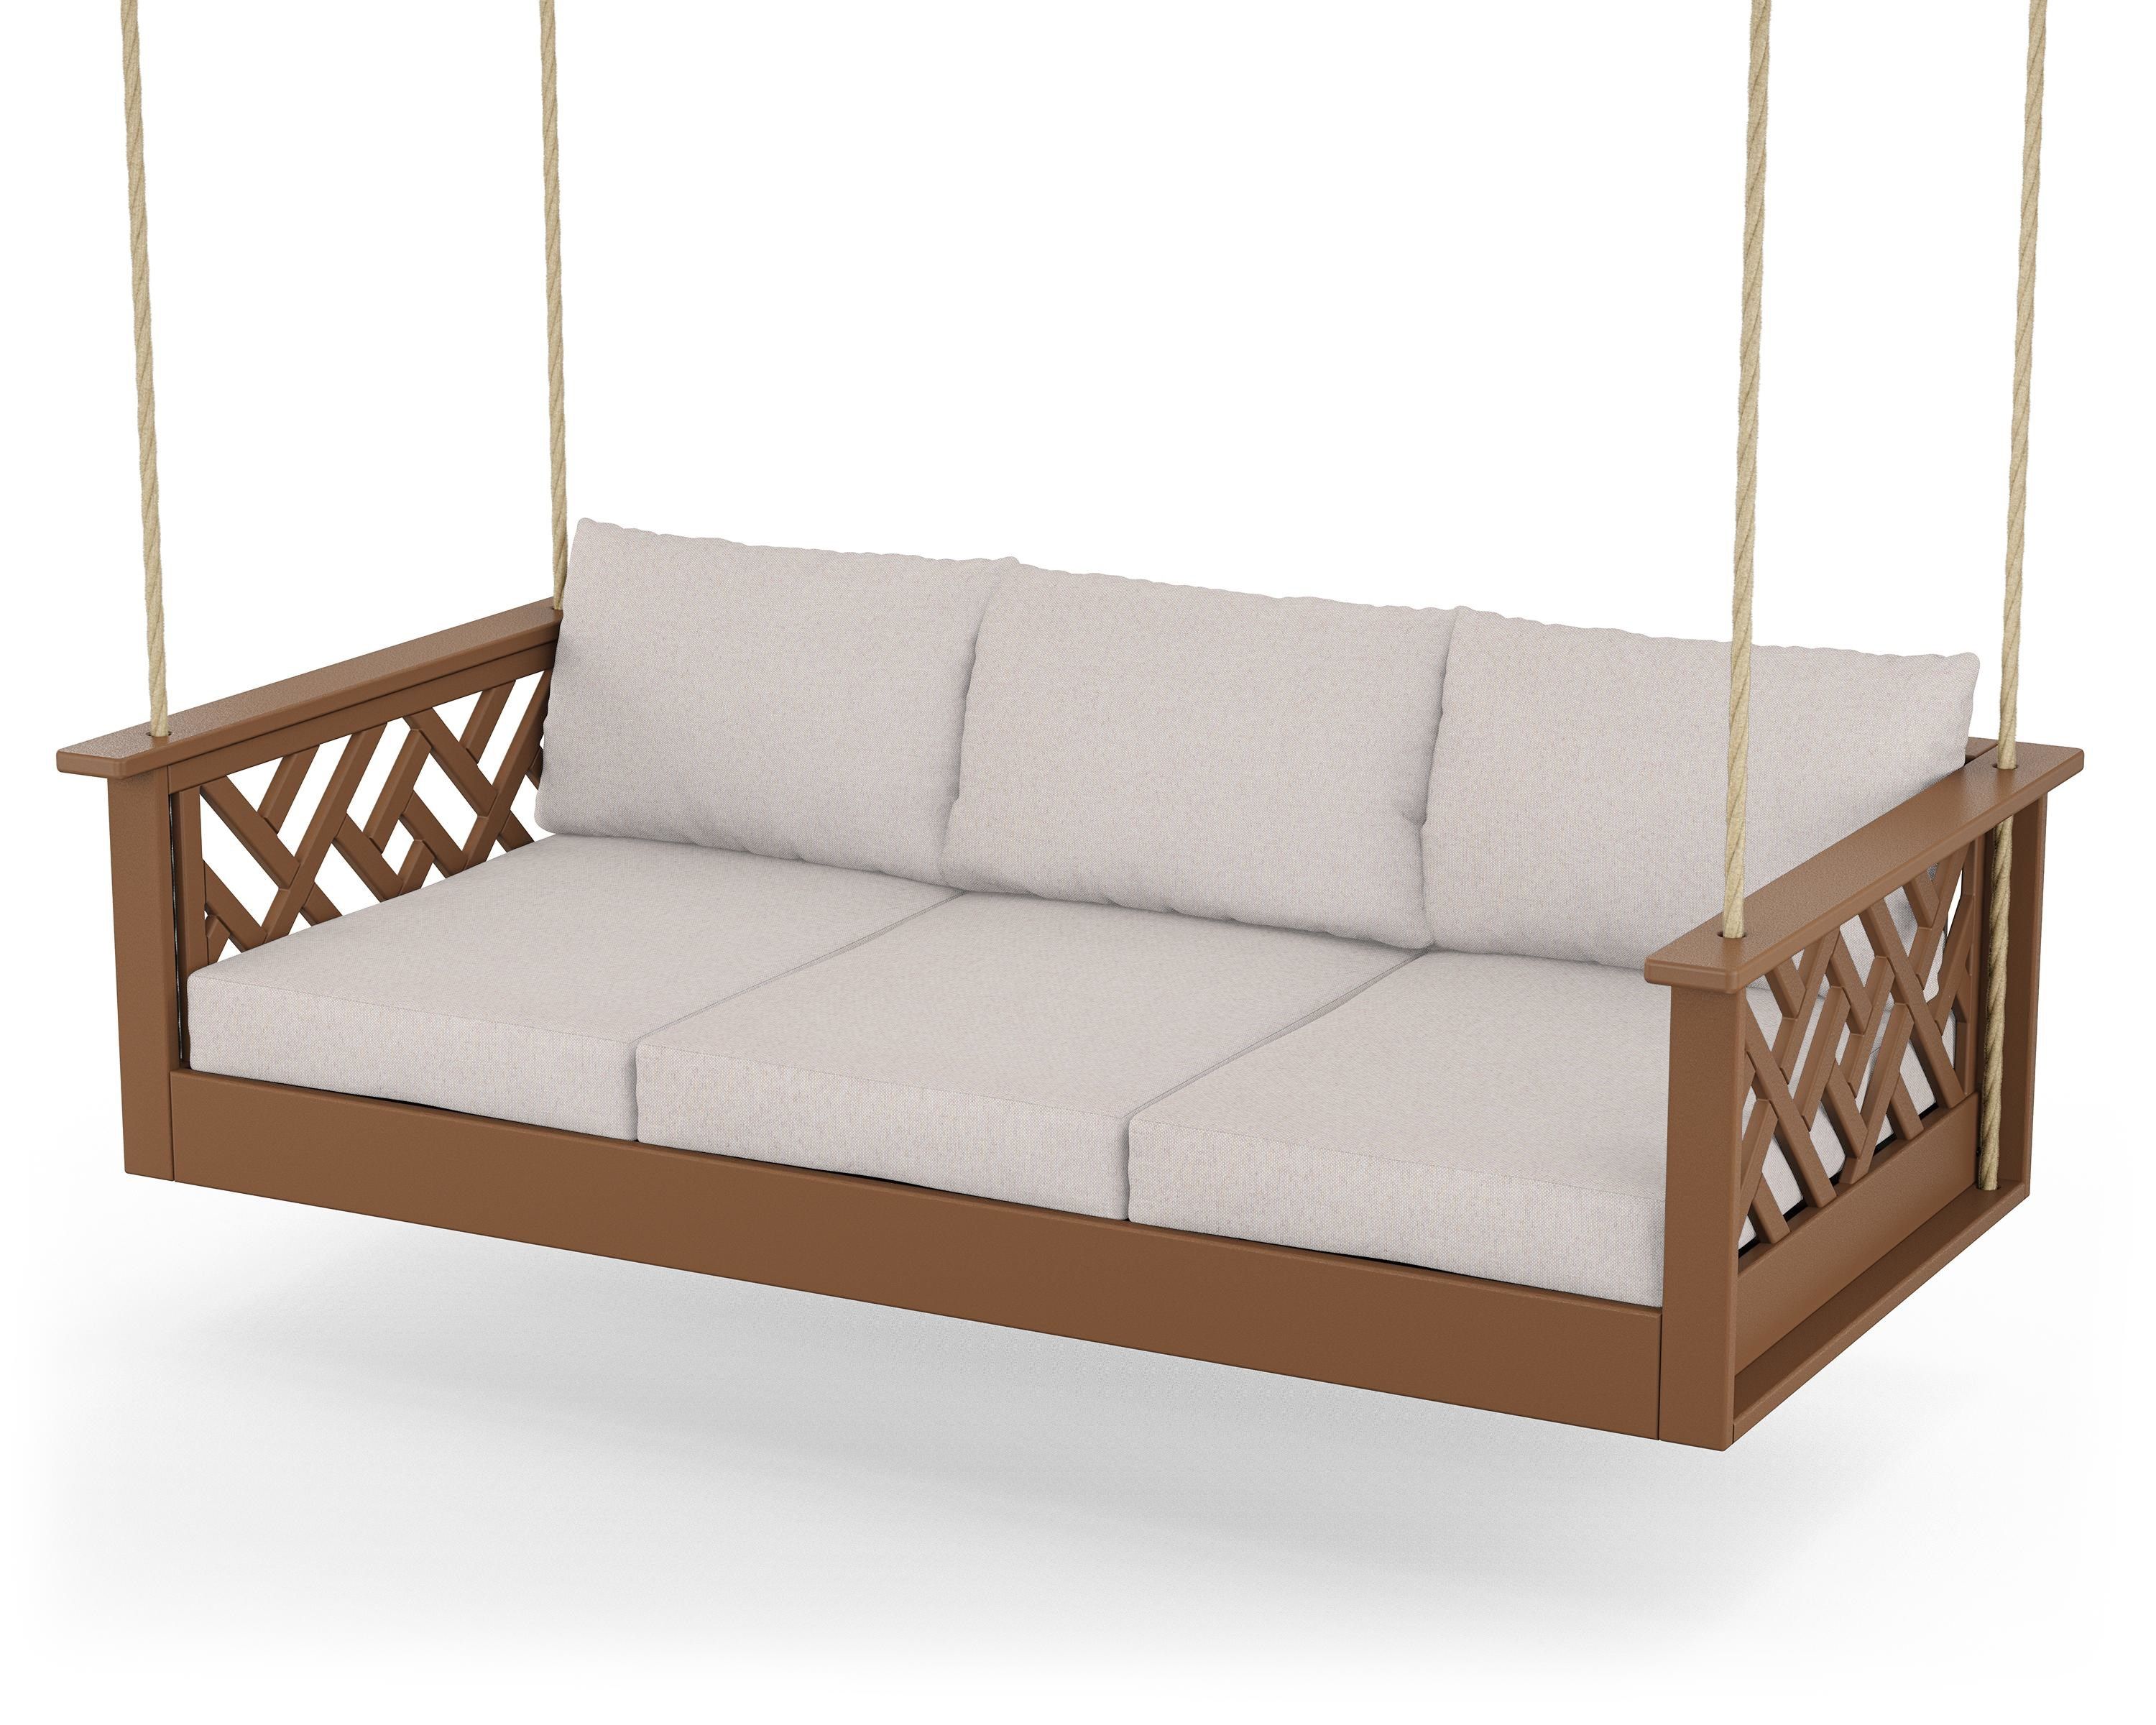 POLYWOOD Chippendale Daybed Swing